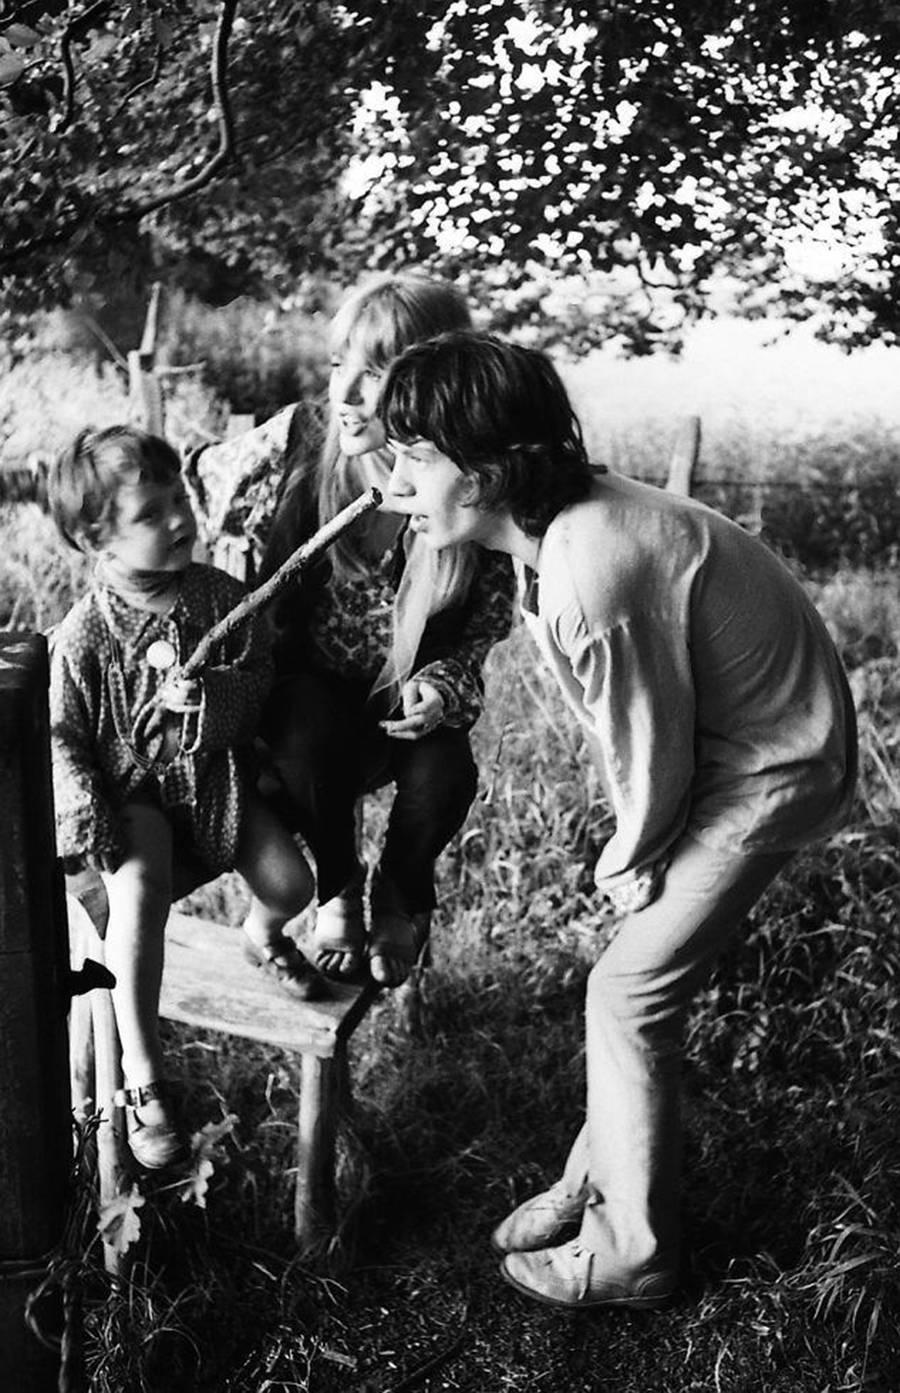 Michael Cooper (b.1941) Black and White Photograph - Mick Jagger & Marianne Faithful